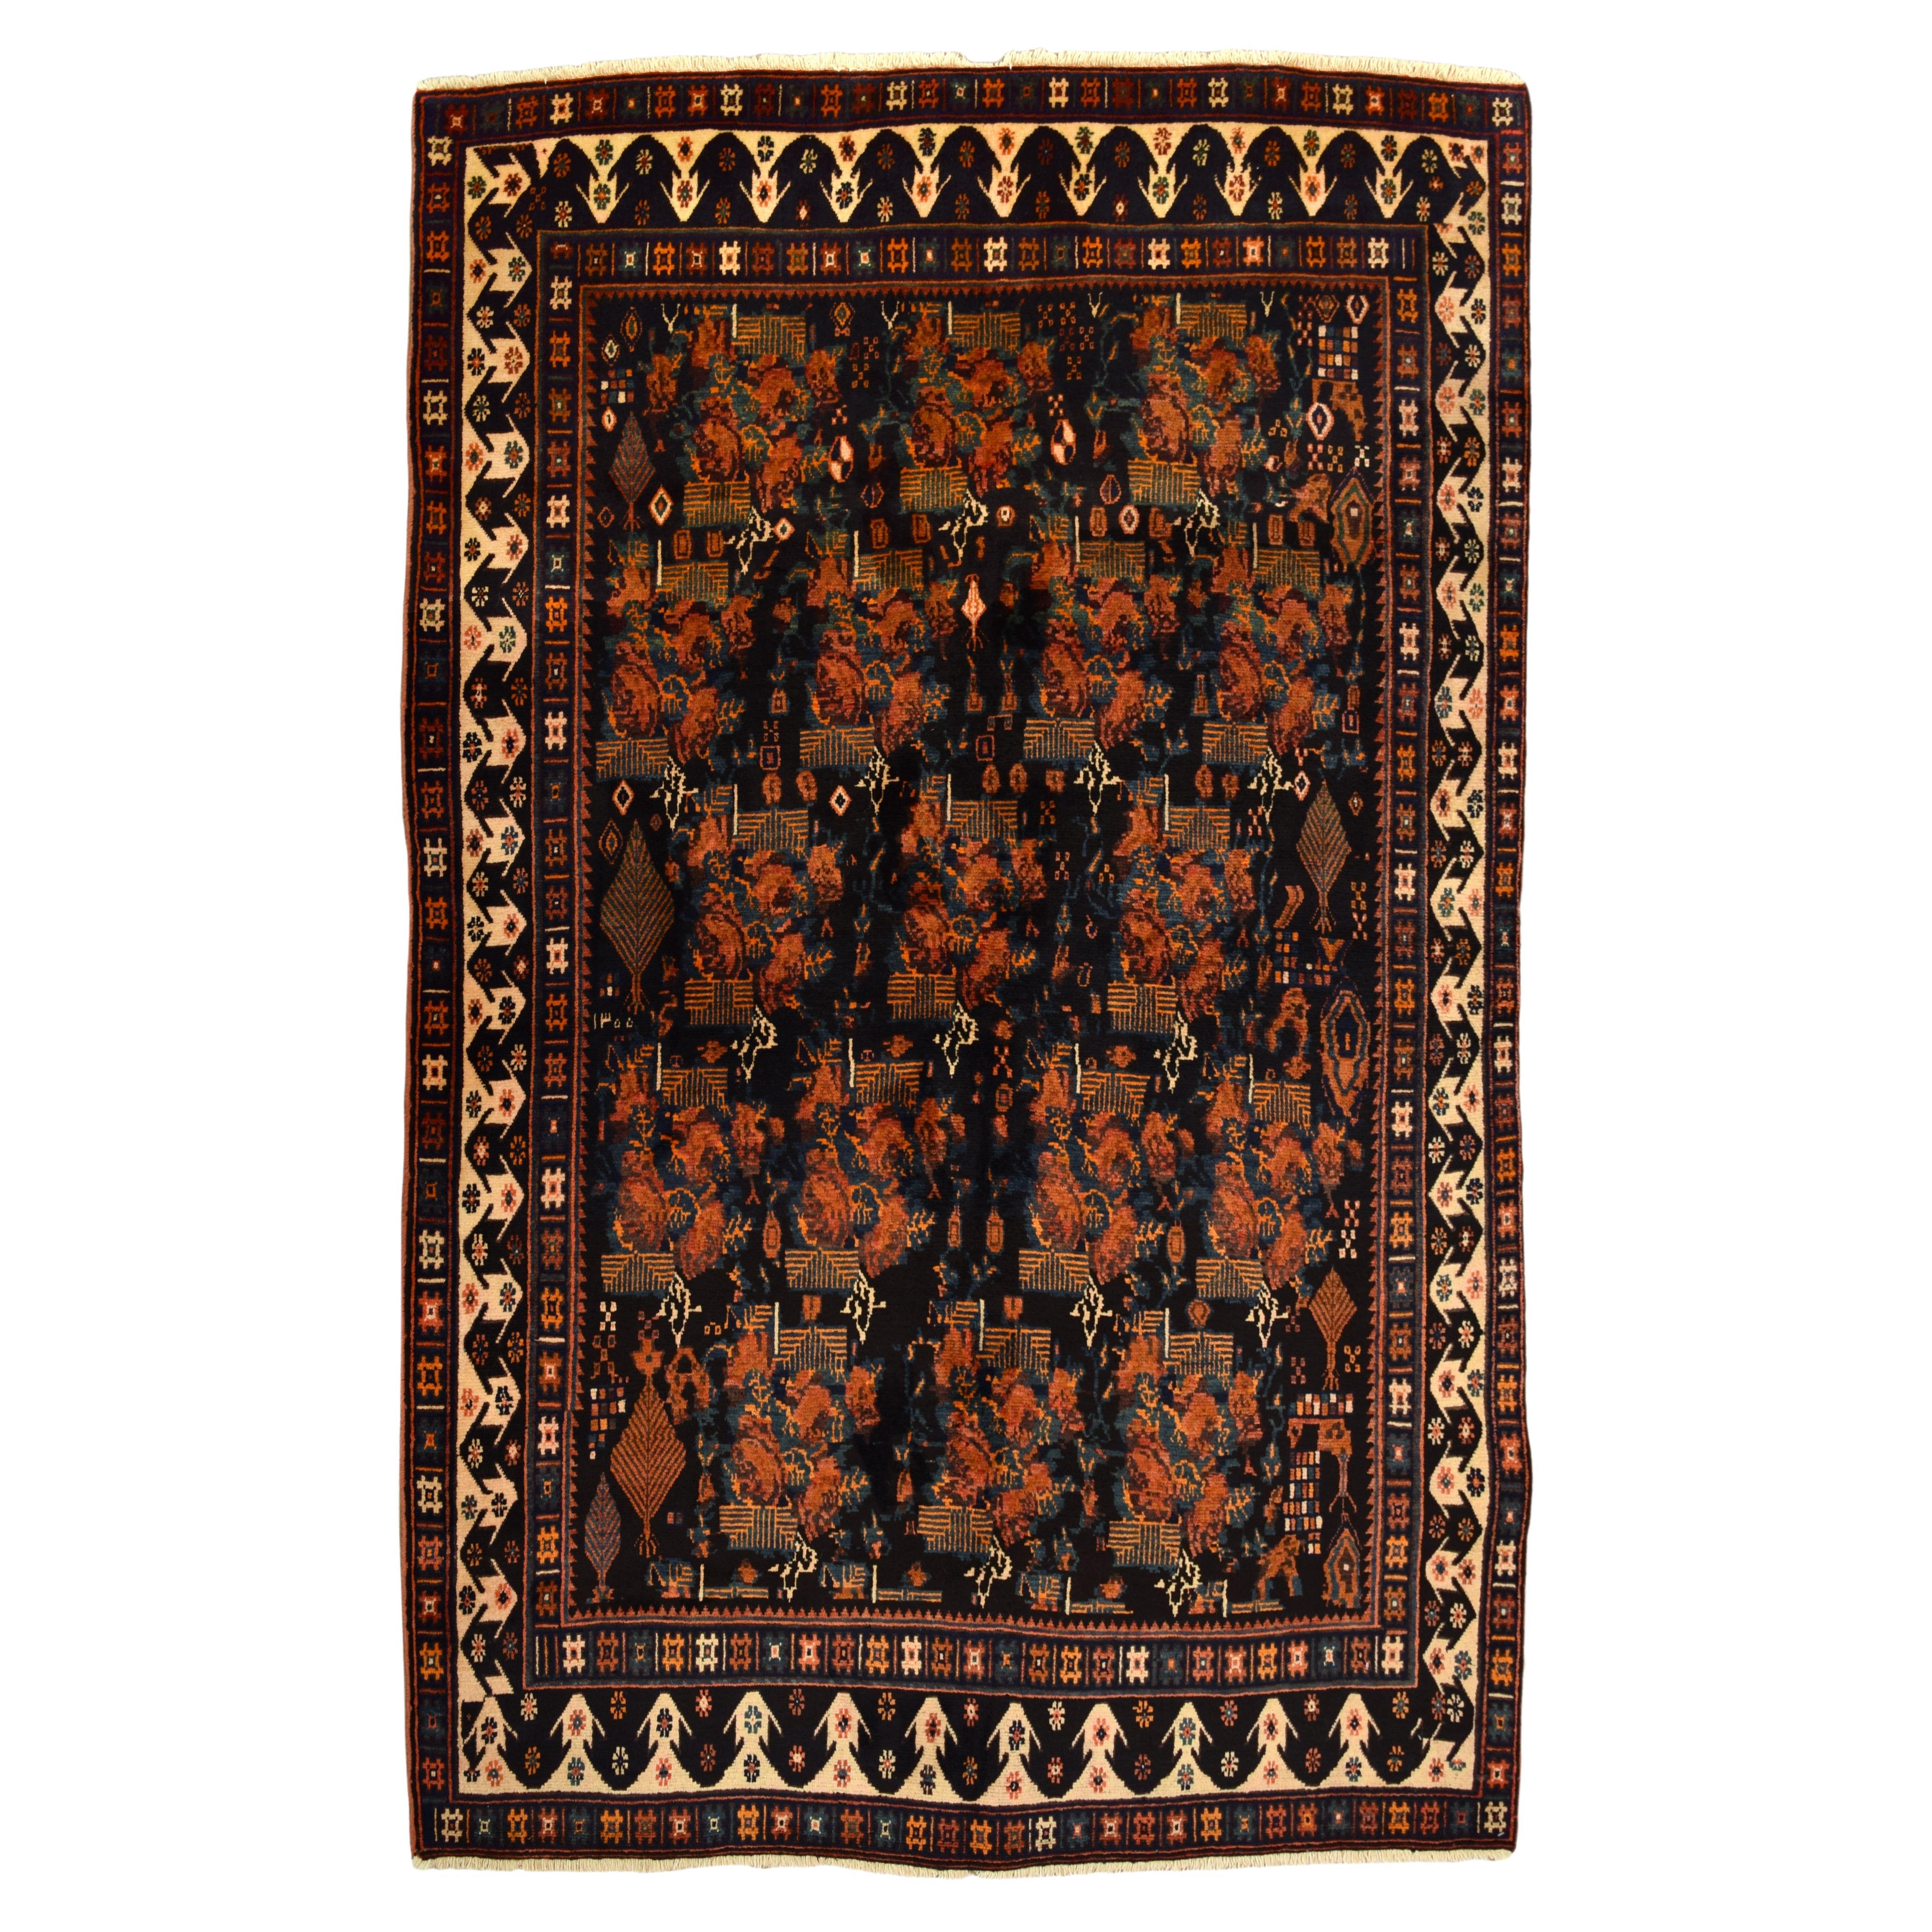 Semi-Antique Afshar, Red and Indigo Wool, Hand-Woven Persian Area Rug, 5' x 7' For Sale